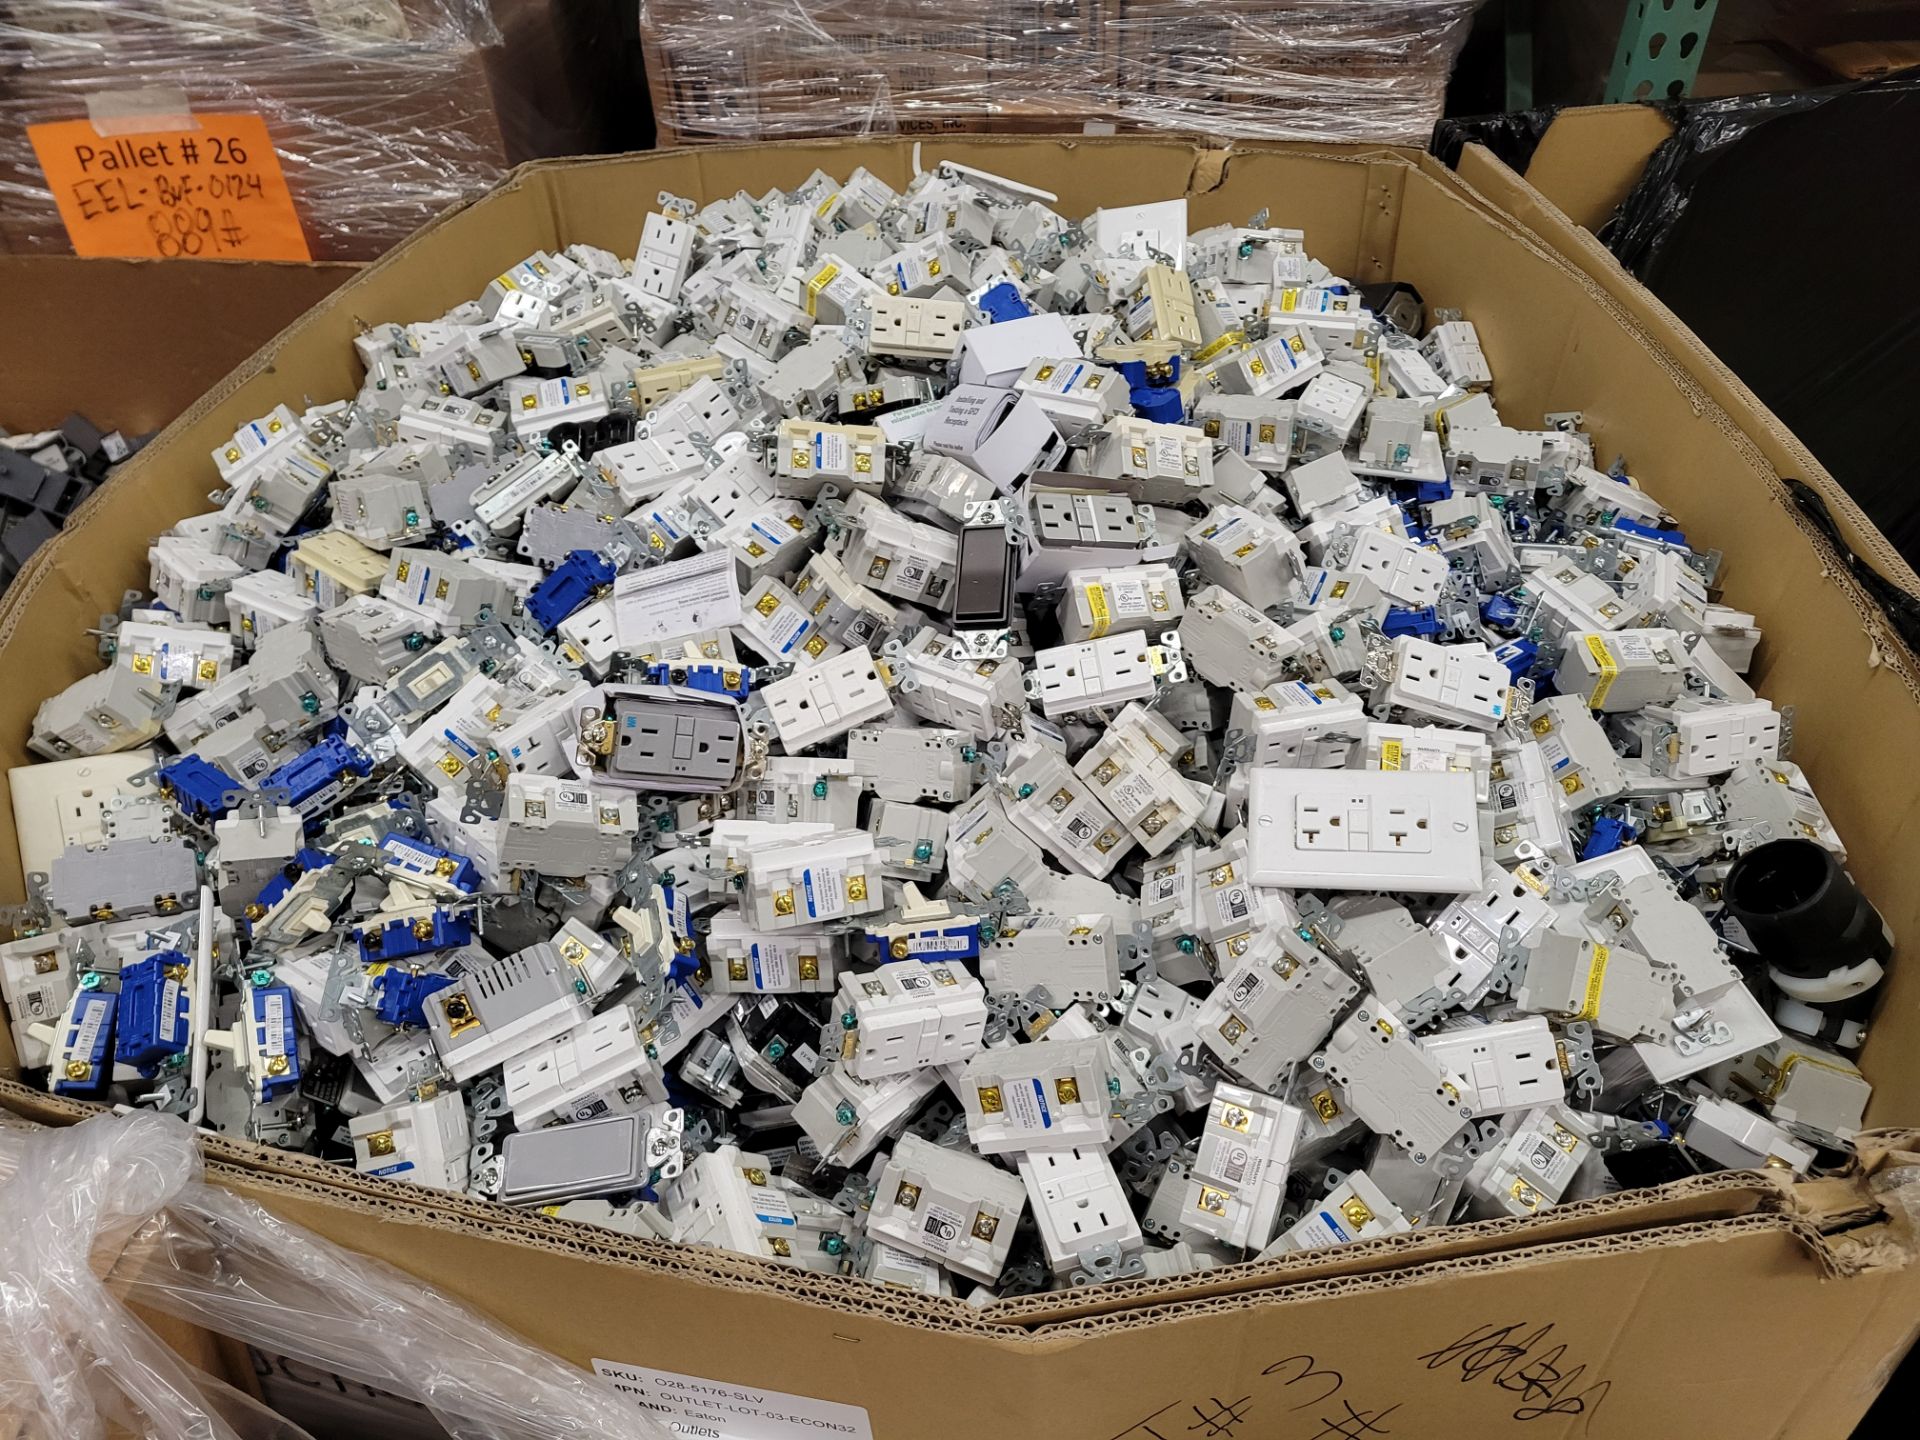 1x Lot of Assorted Eaton Outlets / Switches / Plugs - Est. 3000+ Units